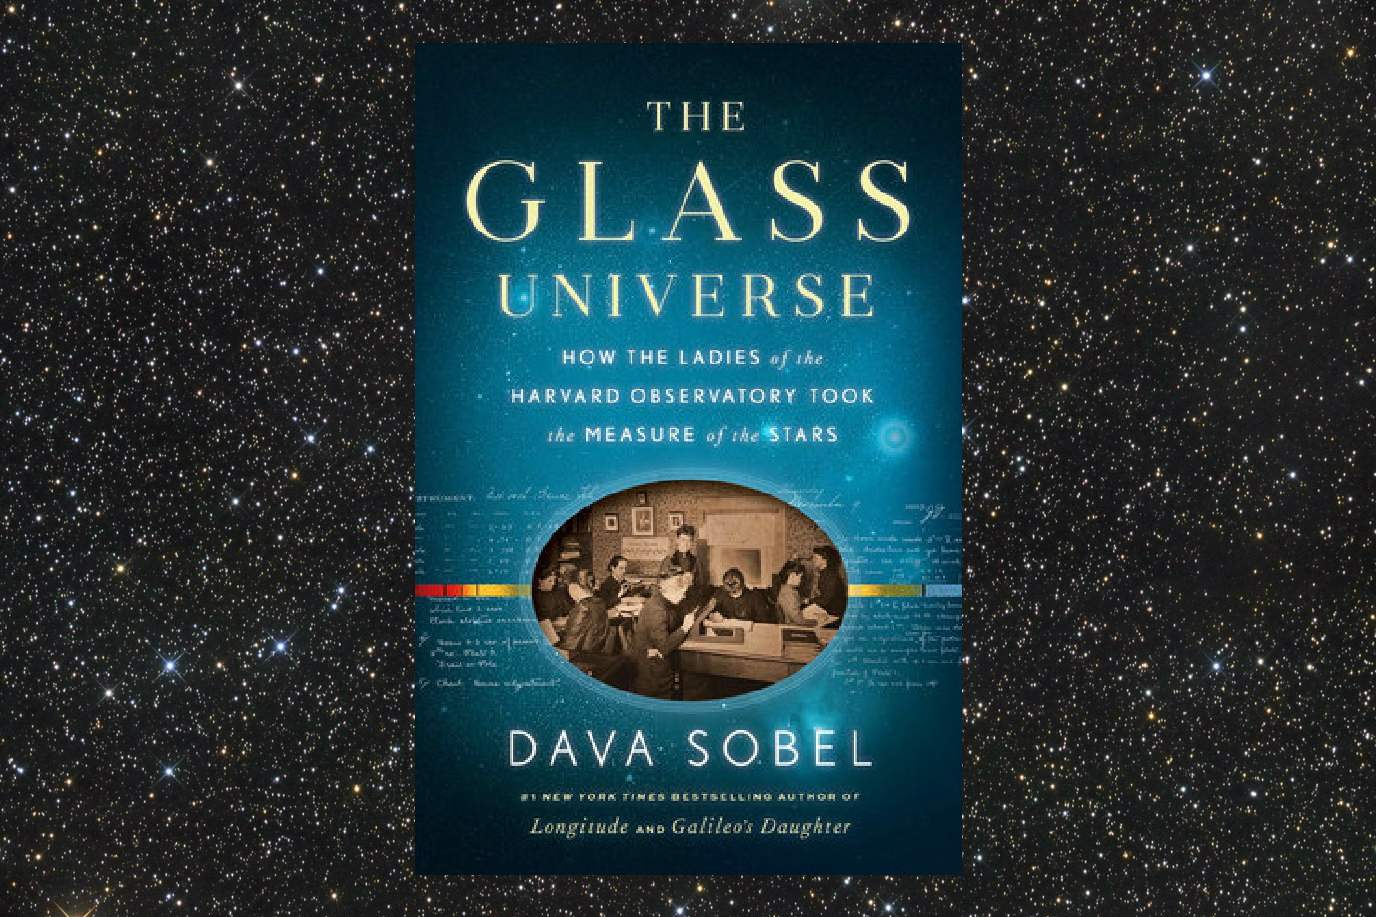 Dava Sobel - The Glass Universe How the Ladies of the Harvard Observatory Took the Measure of the Stars pic